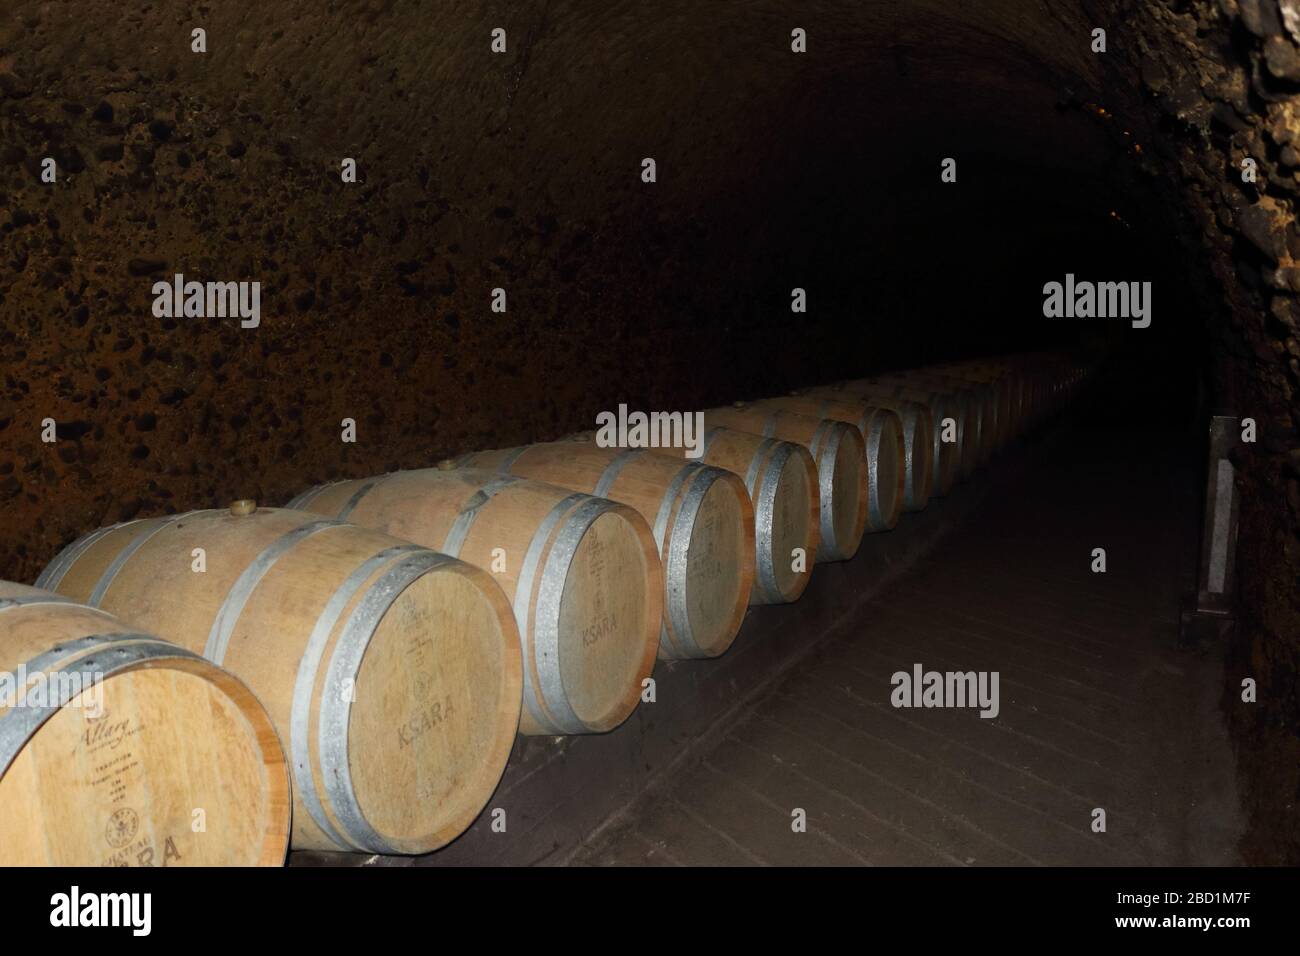 Zahle, Lebanon - August 22, 2017: Old wine barrels arranged in a cave. Stock Photo